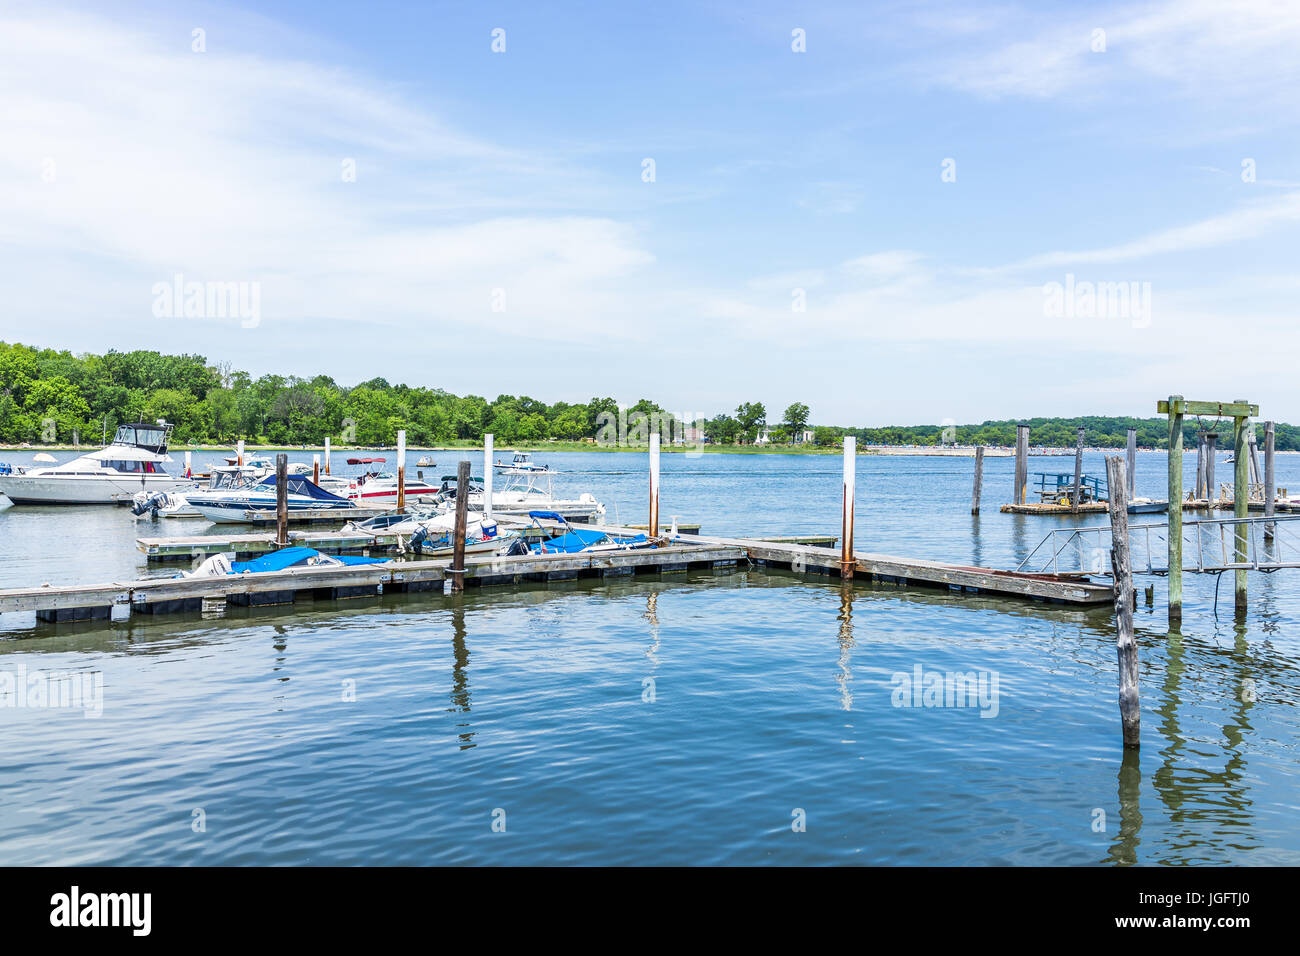 Bronx, USA - June 11, 2017: City Island harbor with boats and reflection Stock Photo